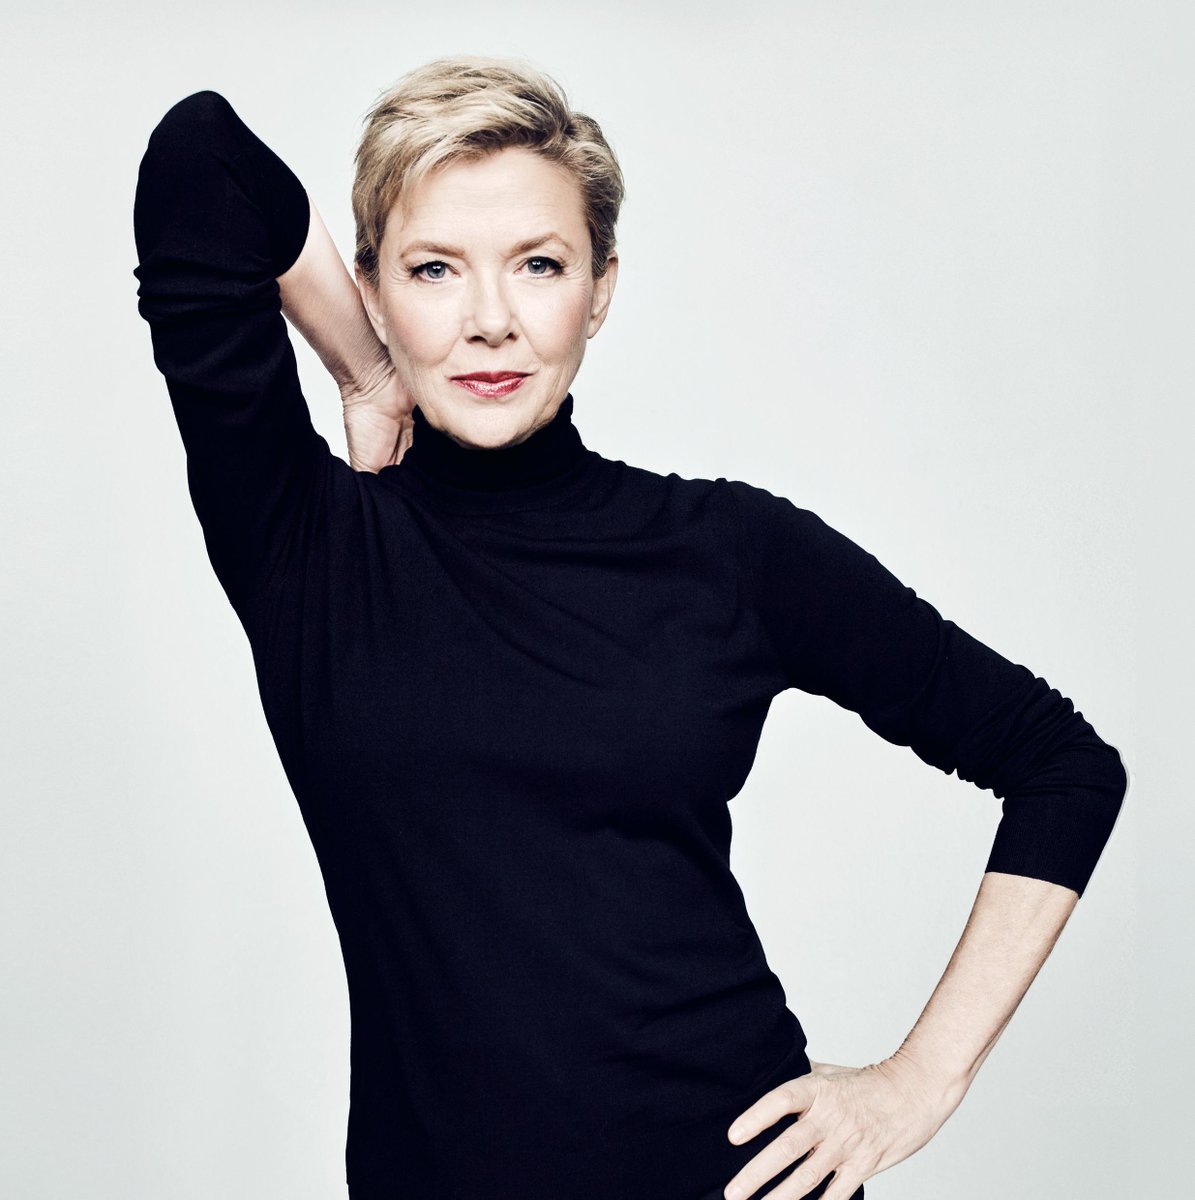 'Right now, I love the fact that I have so many opportunities, but I know this privileged position cannot last. That doesn't mean that I'll stop working. I picture myself as an old actress doing cameos in films with people saying: 'Isn't that that Bening woman?'' 
#AnnetteBening